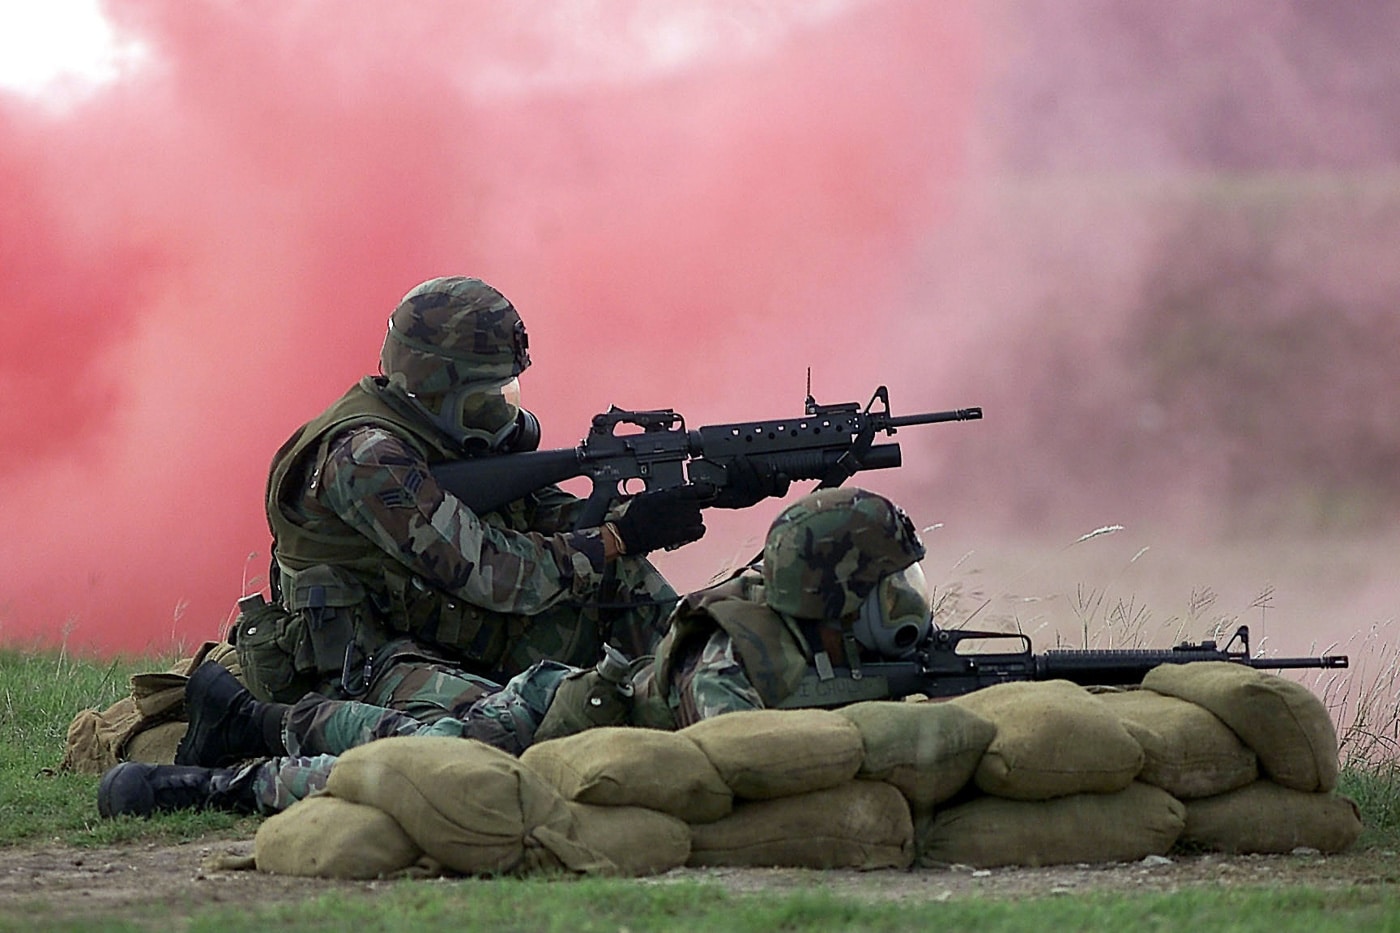 usaf security forces use m203 grenade launcher during training